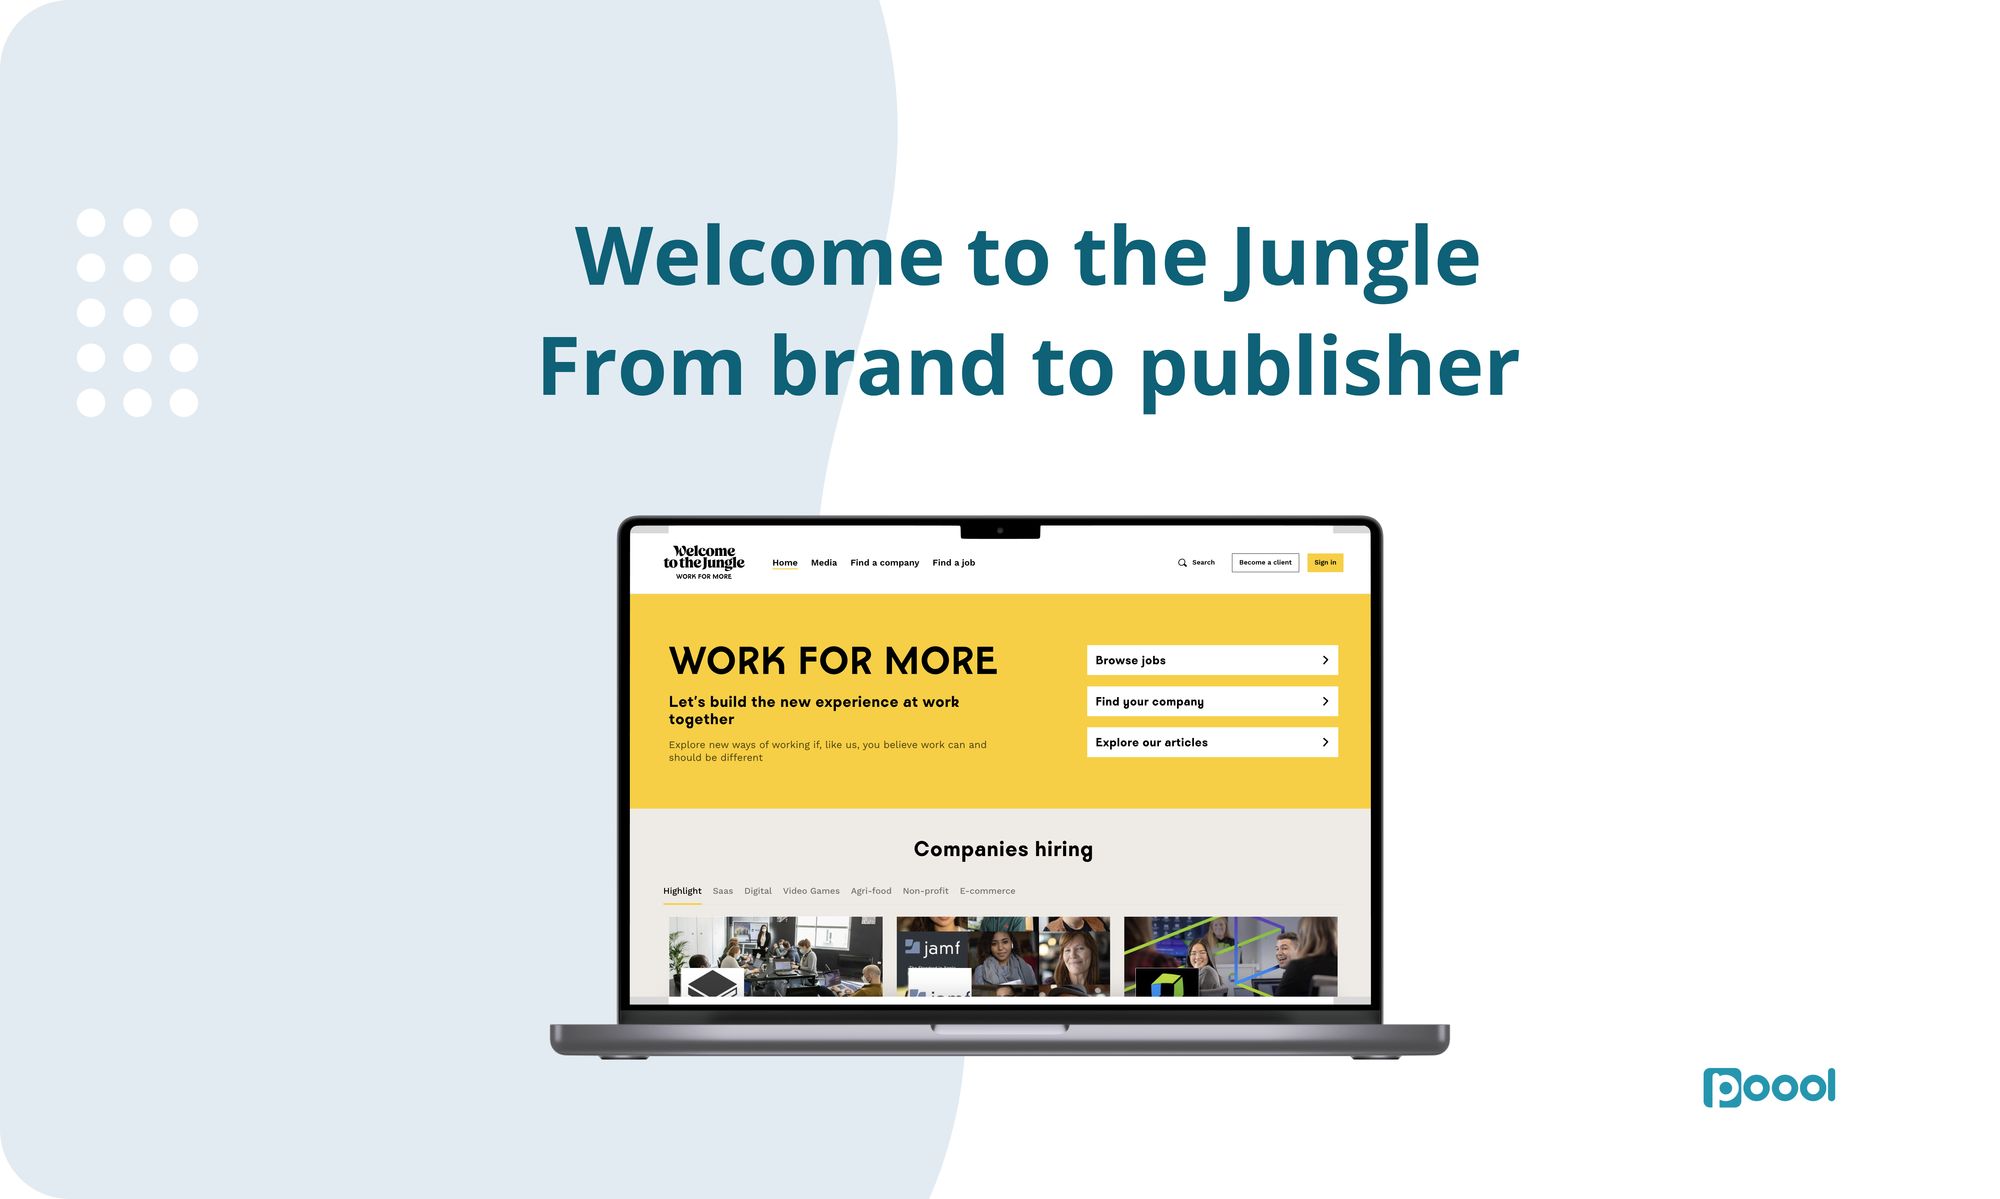 Welcome to the Jungle, from brand to publisher